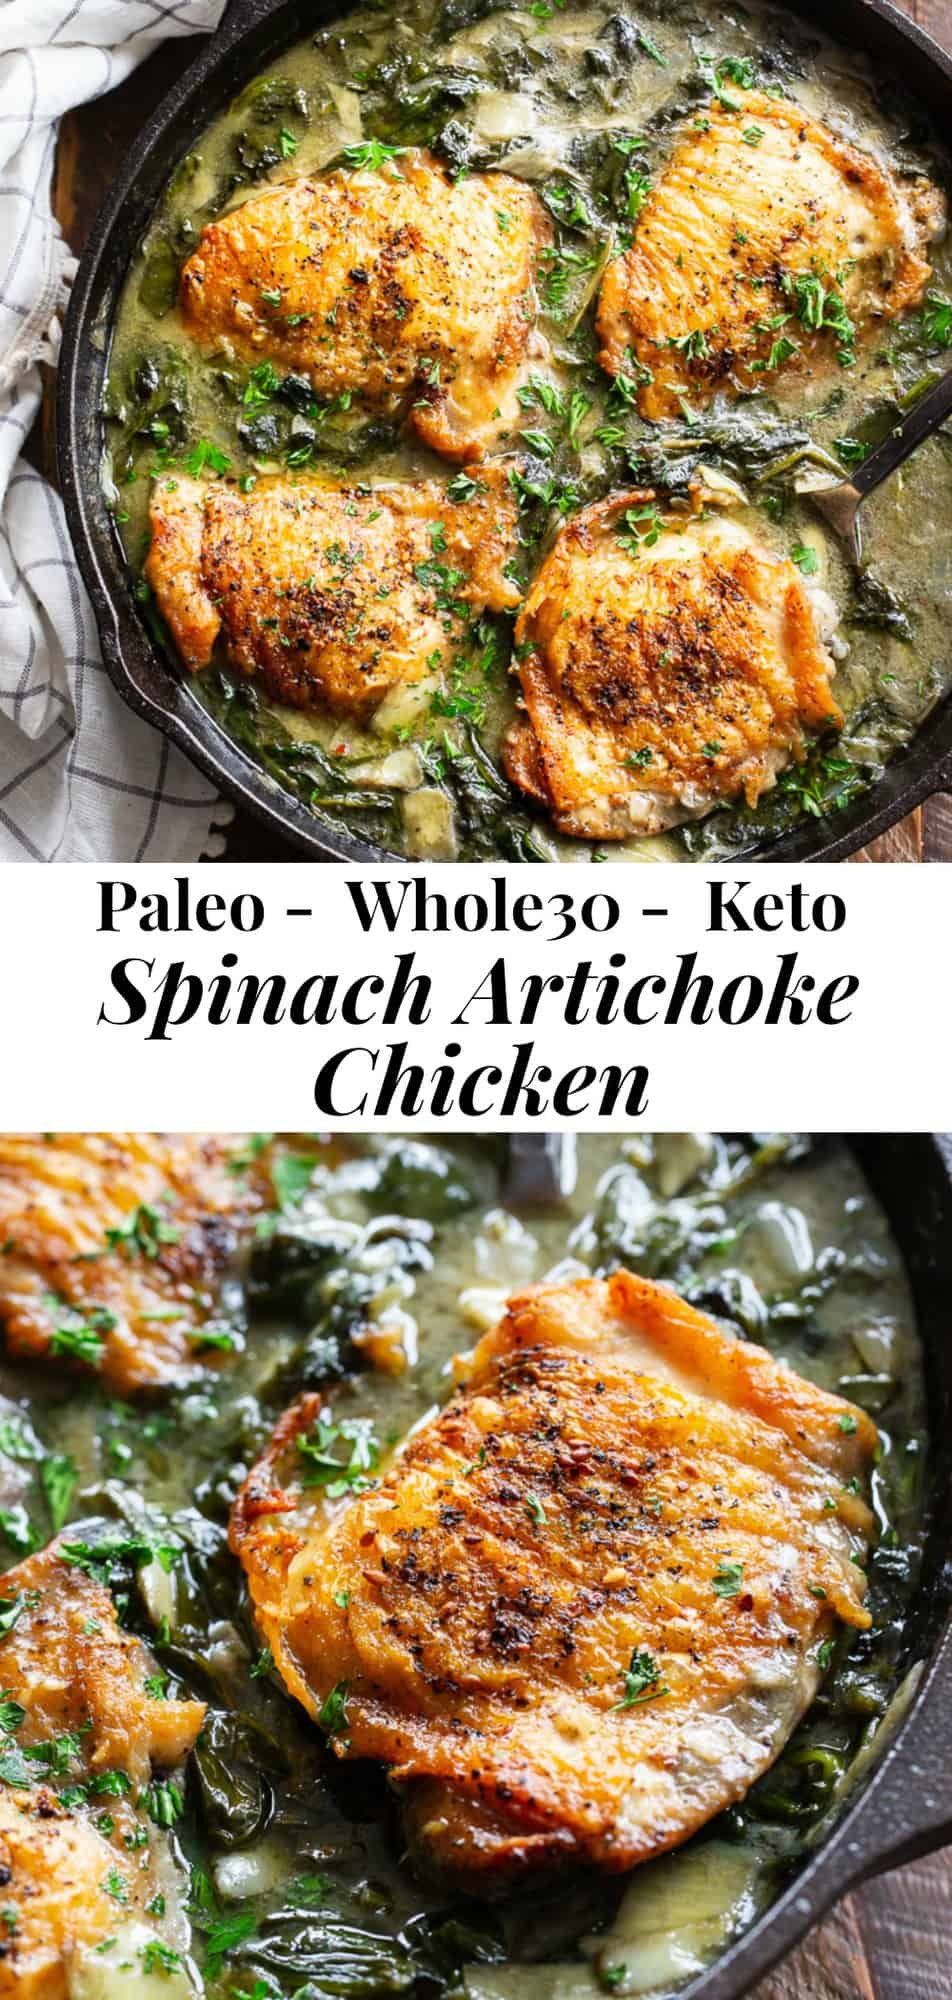 This one-skillet spinach artichoke chicken is crispy, creamy, and packed with flavor!  It’s Paleo, Whole30 compliant, keto friendly, dairy free, and made all in one skillet.  An easy healthy dinner for weeknights  and great served alone or over cauliflower rice!   #paleo #whole30 #keto